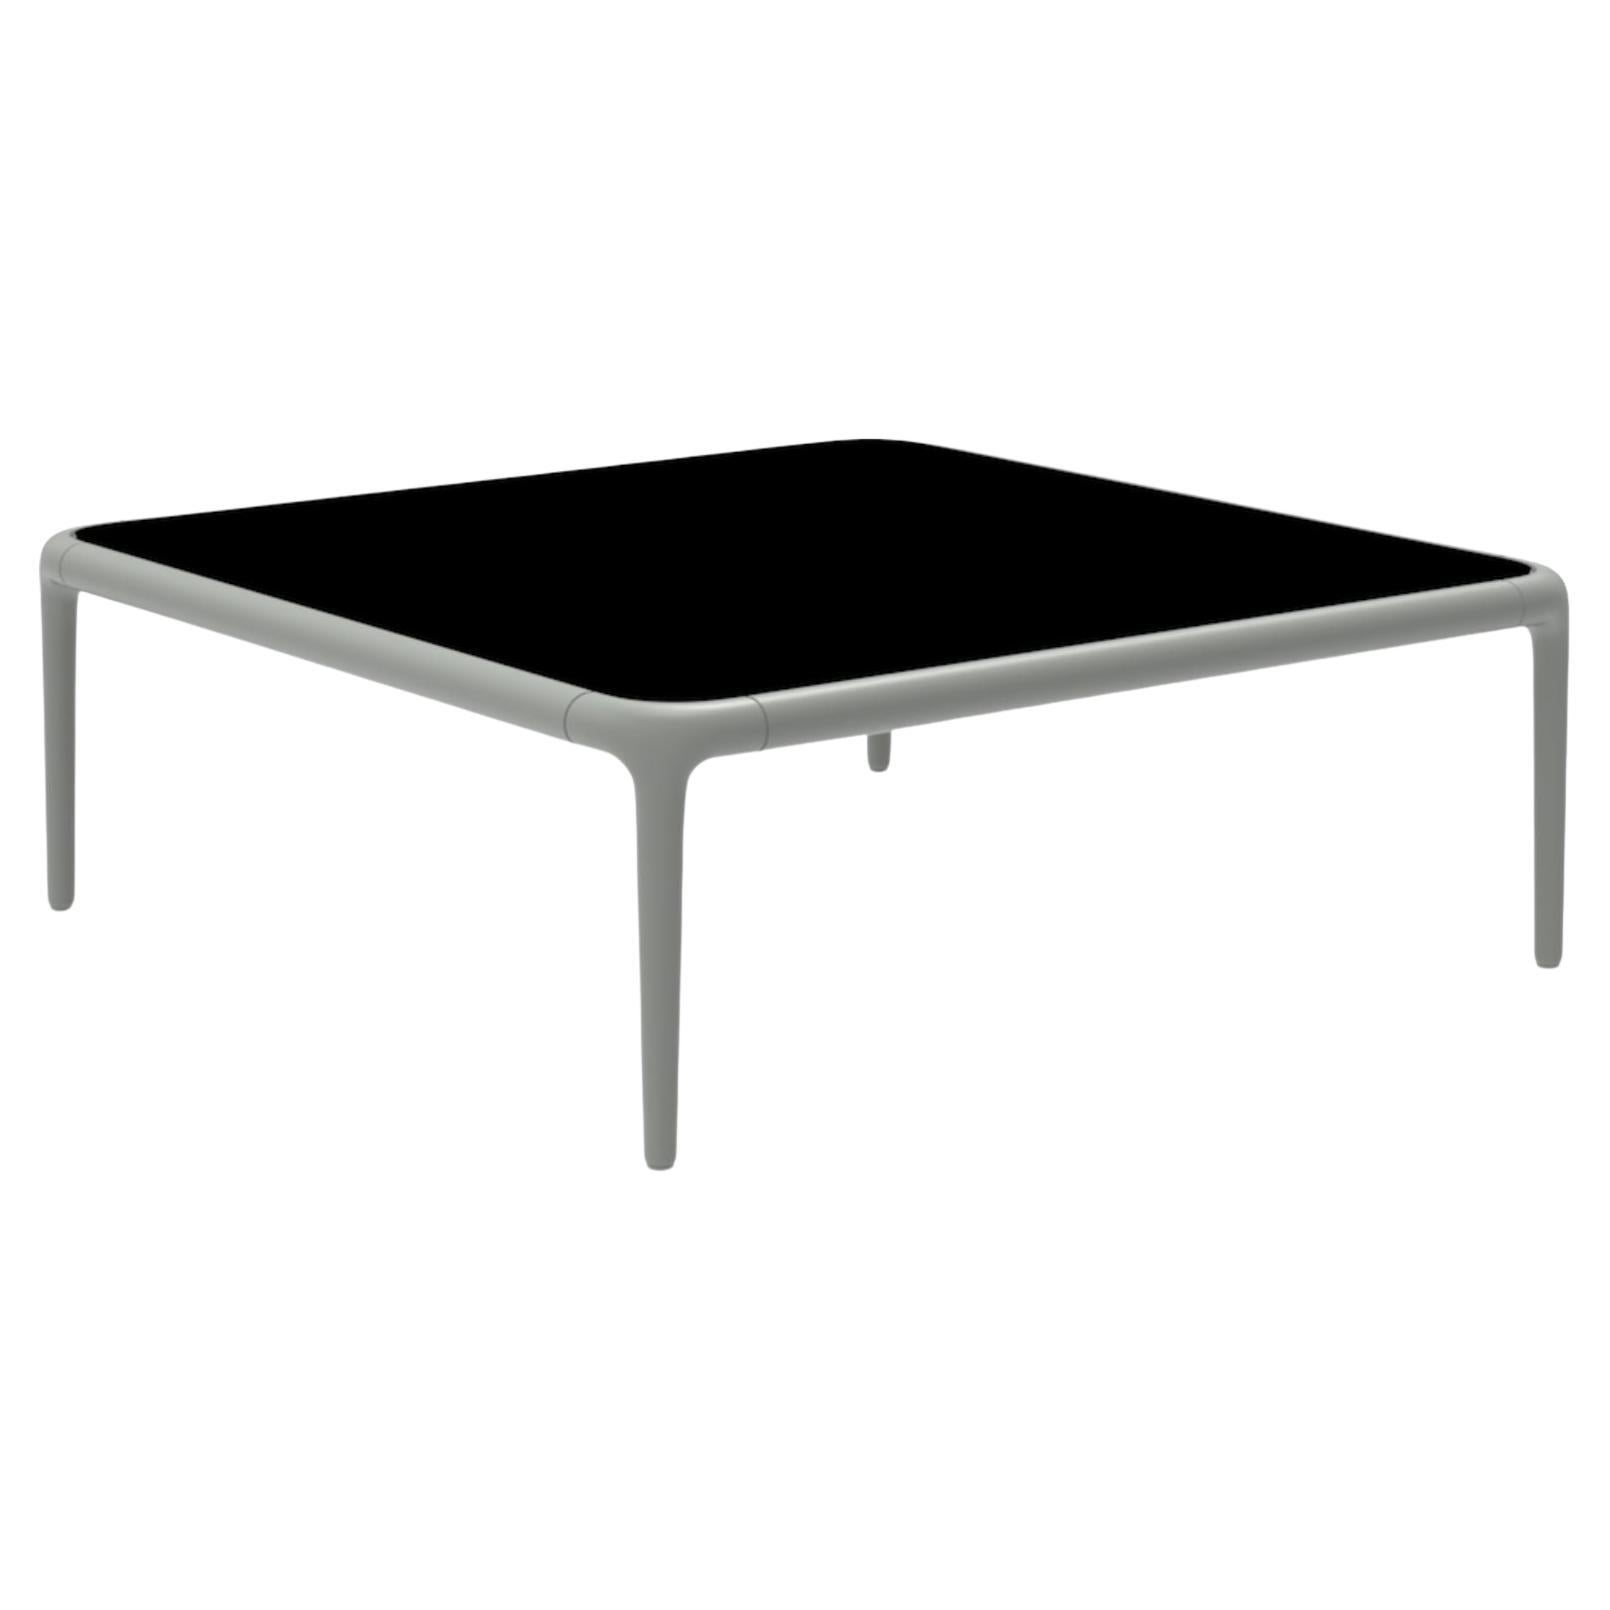 Xaloc Silver Coffee Table 80 with Glass Top by Mowee